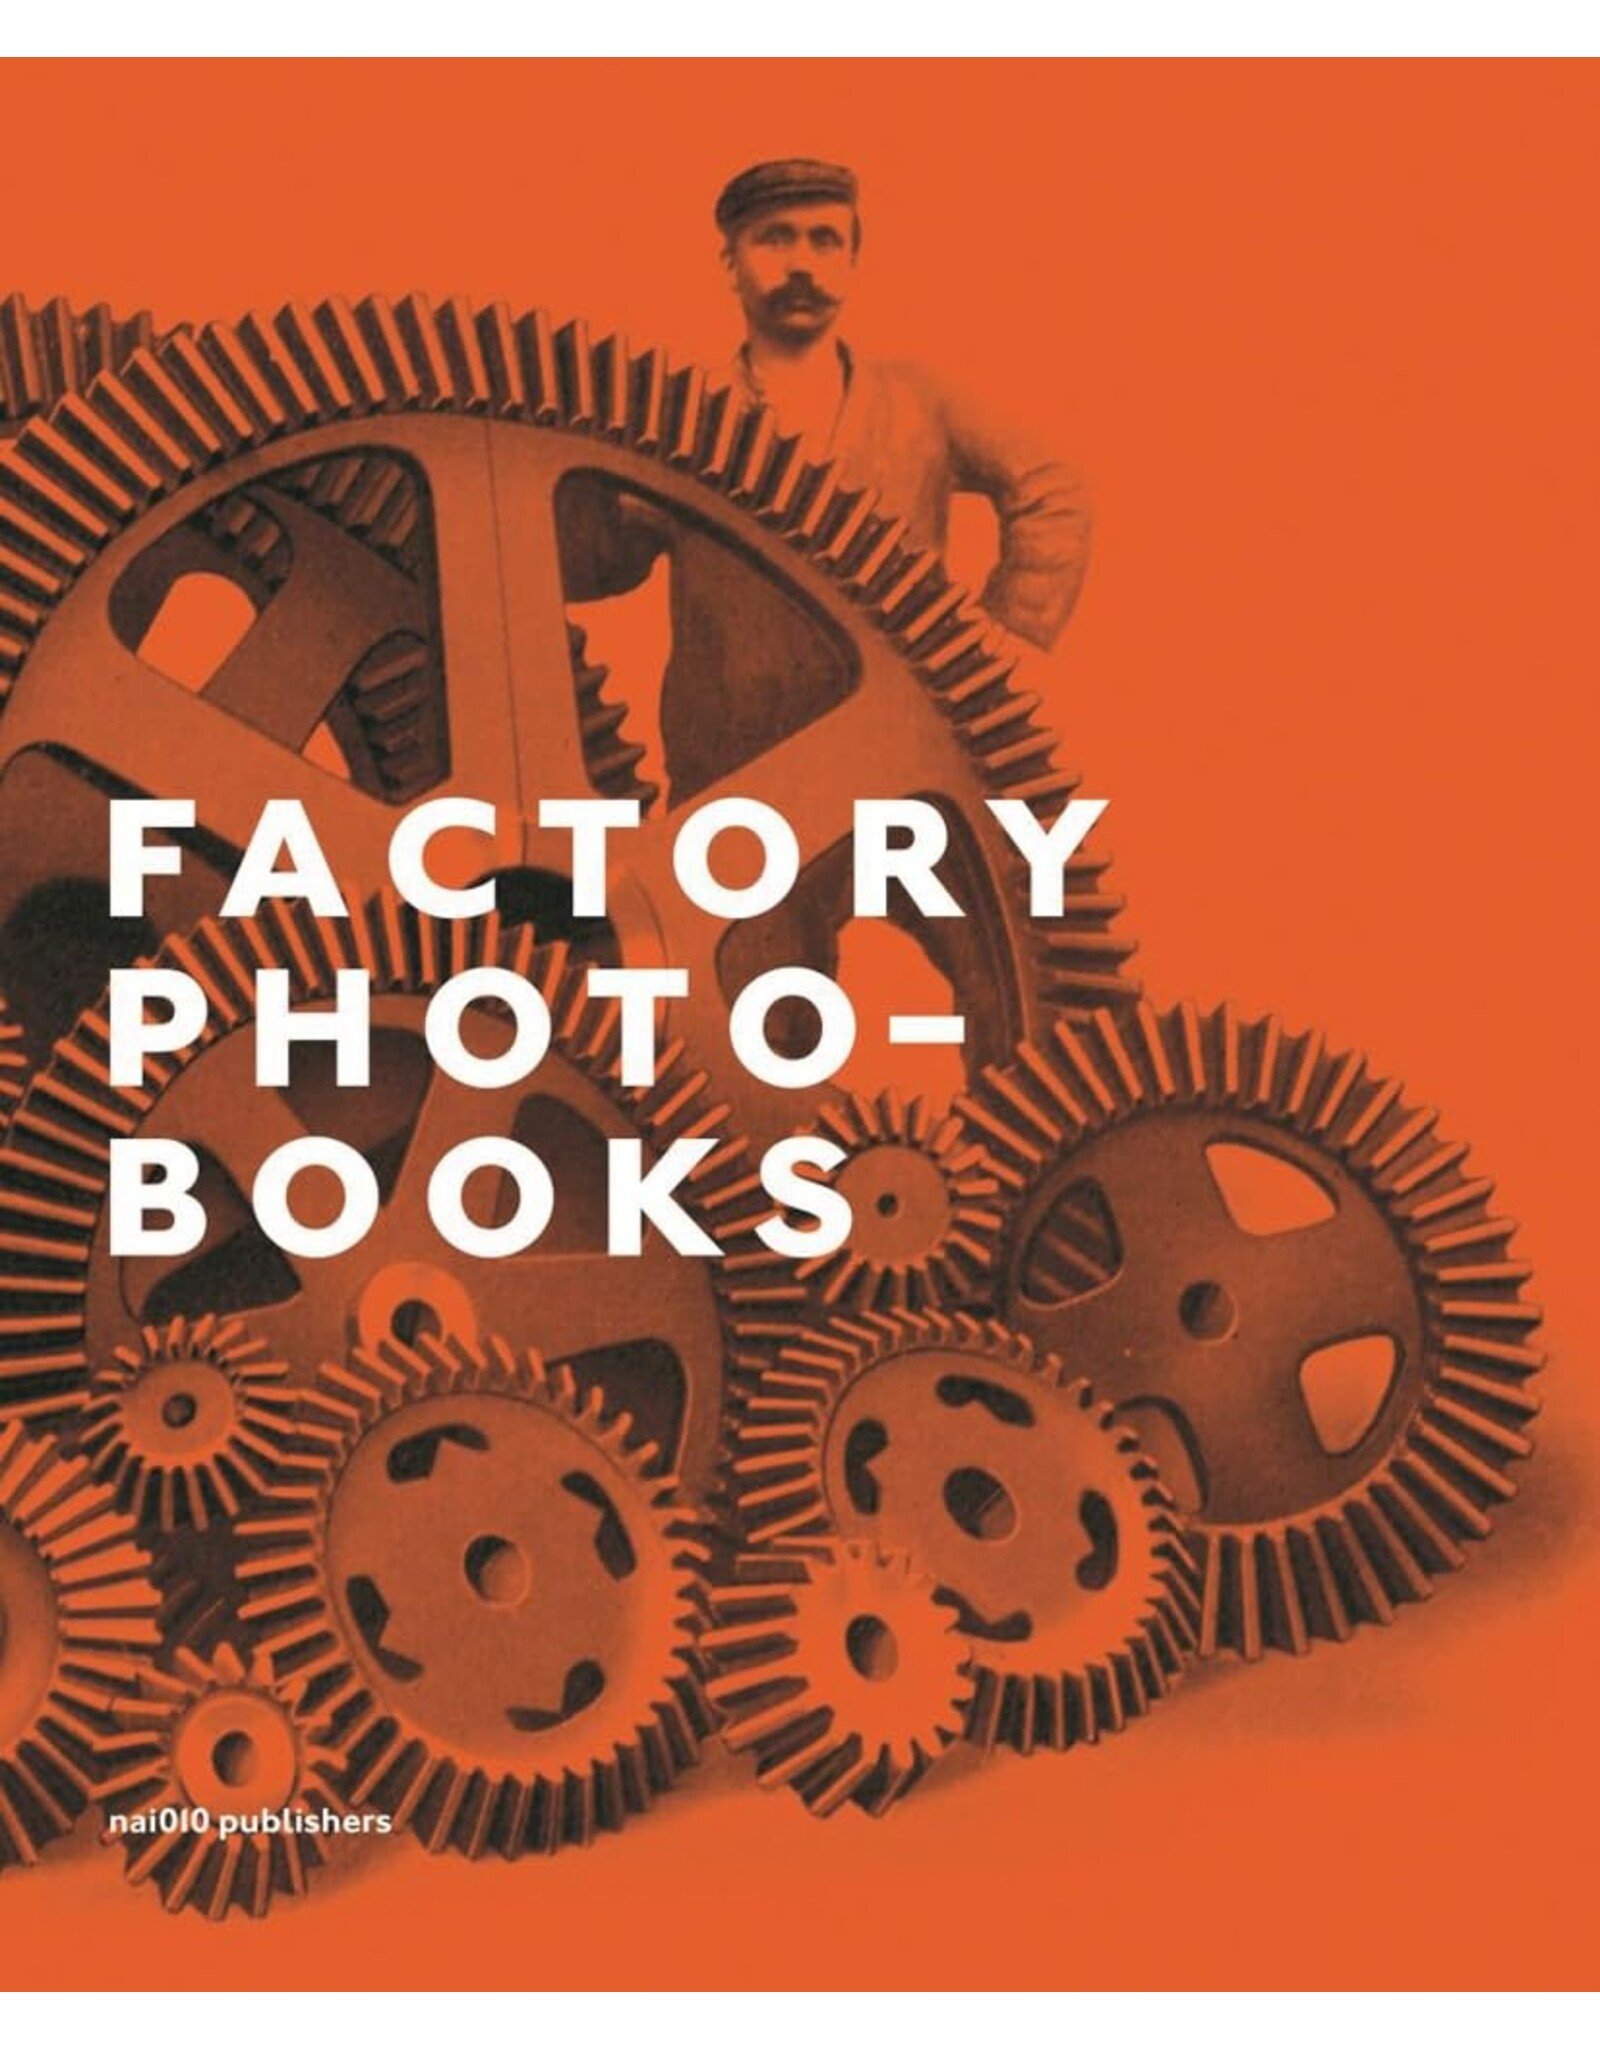 Bart Sorgedrager: Factory Photo-Books